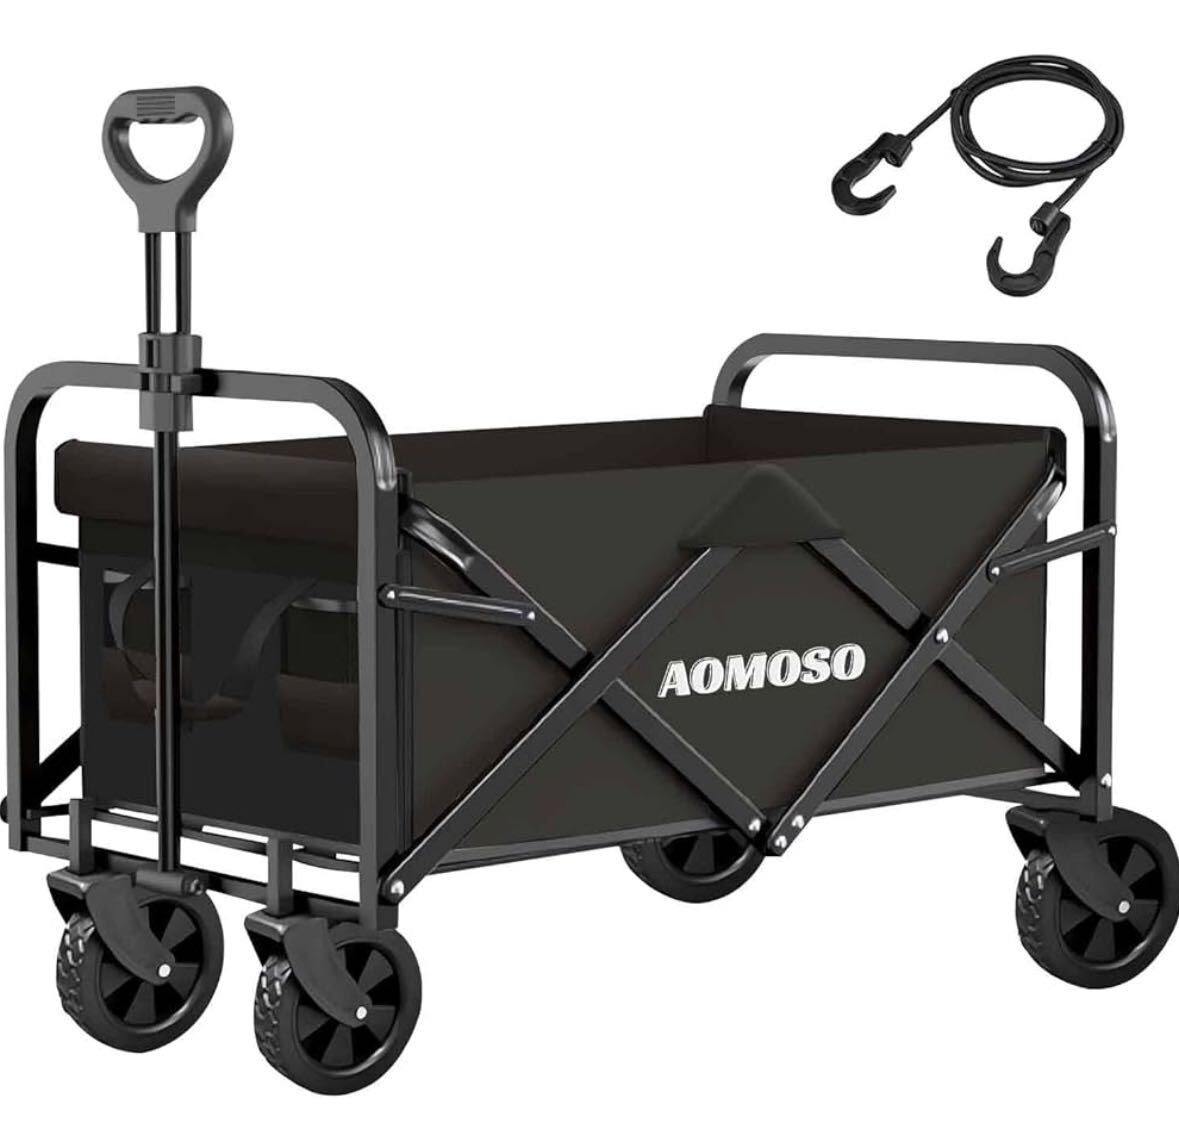  carry wagon folding type carry cart outdoor carry wagon light weight high capacity 100L withstand load 100kg storage pocket attaching compact,